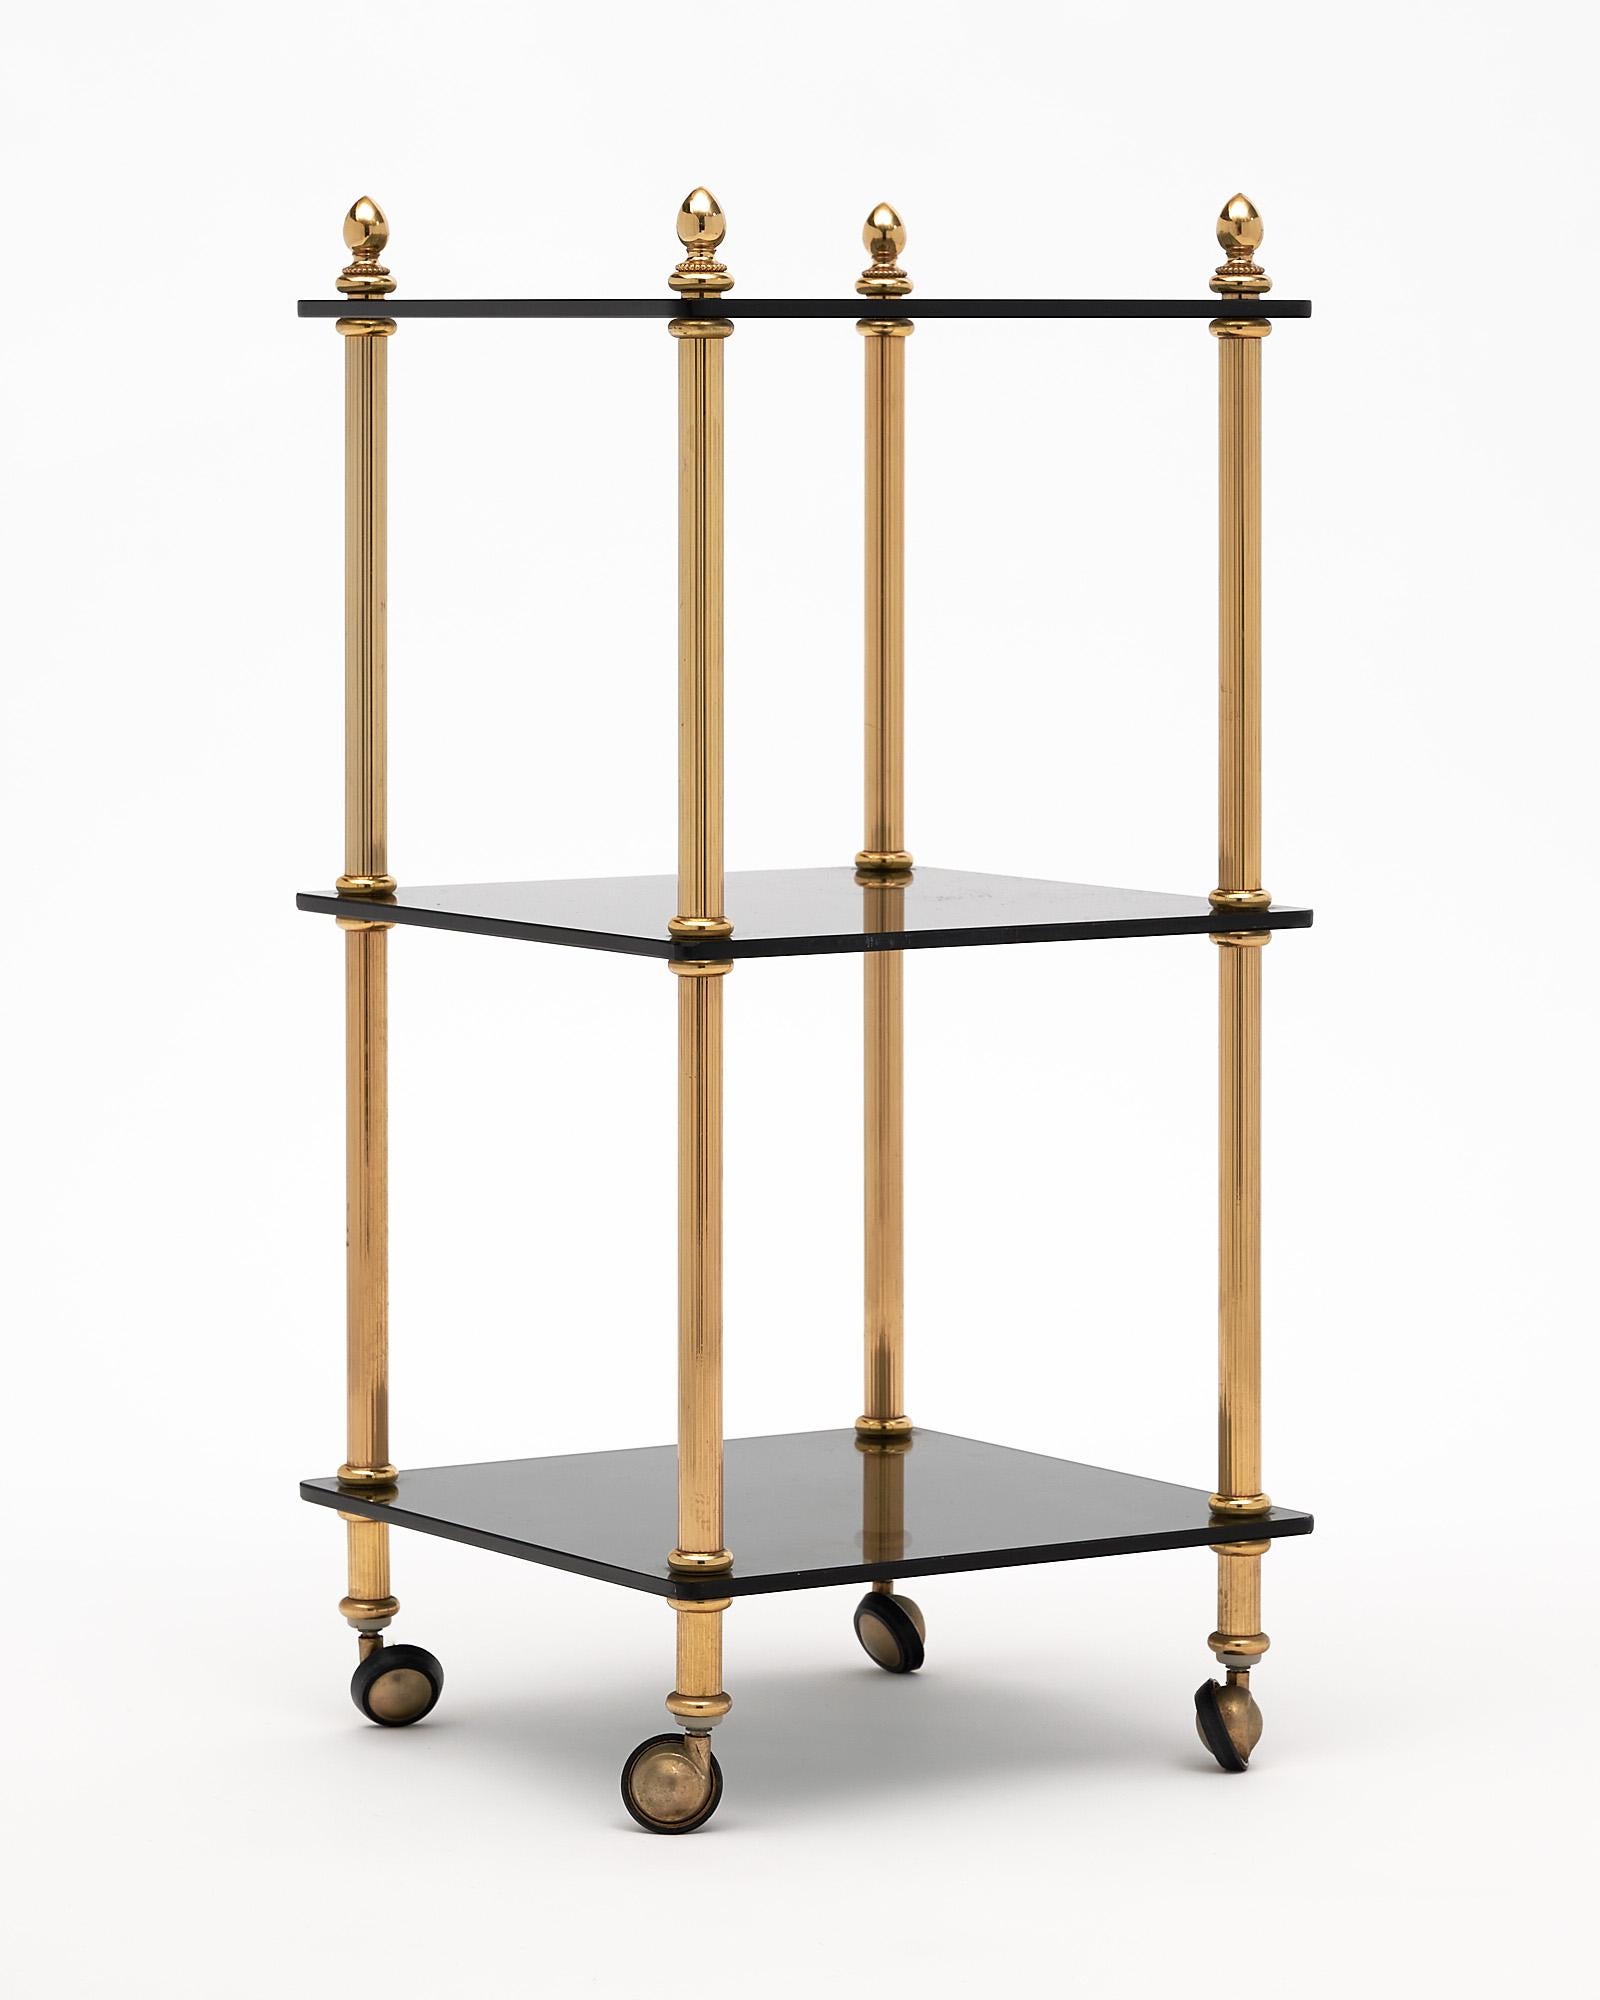 Three tiered side table, French, the piece features a gilt brass structure on casters and three cobalt glass shelves.